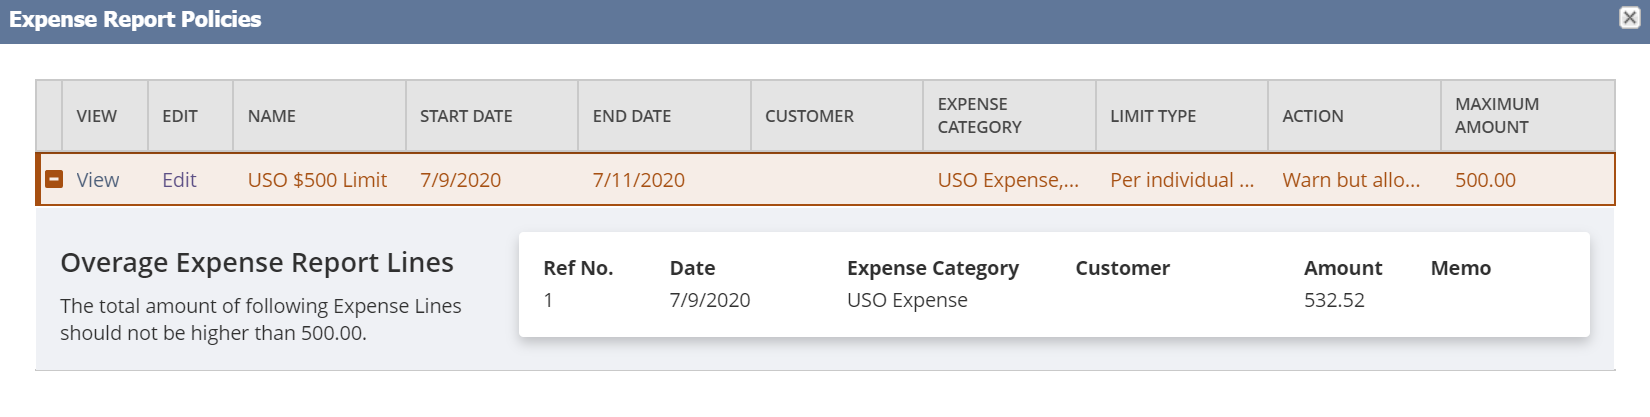 NetSuite Applications Suite Expense Report Policies